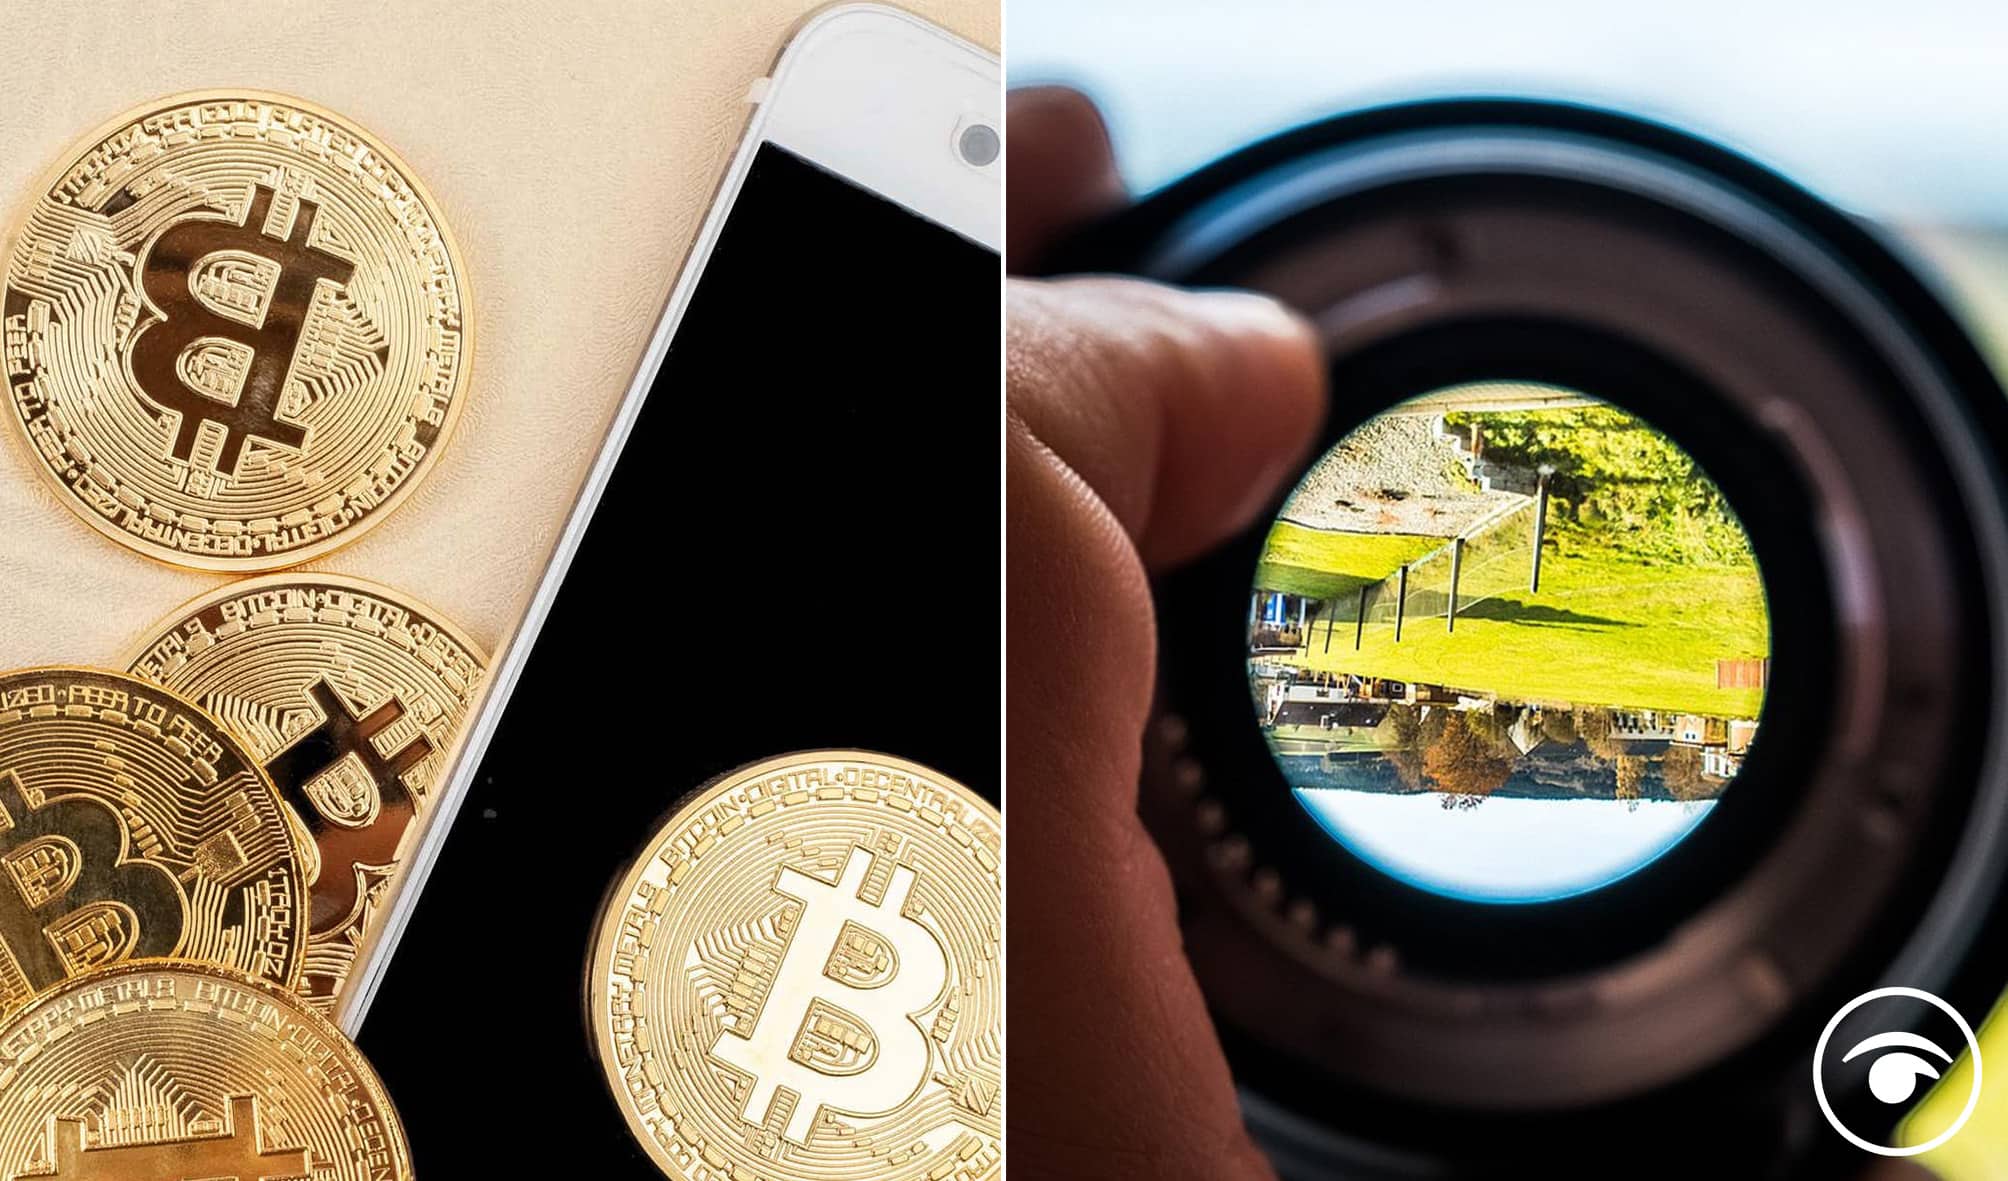 ‘Scam’ Cryptocurrencies and the ’looking glass’ world of finance